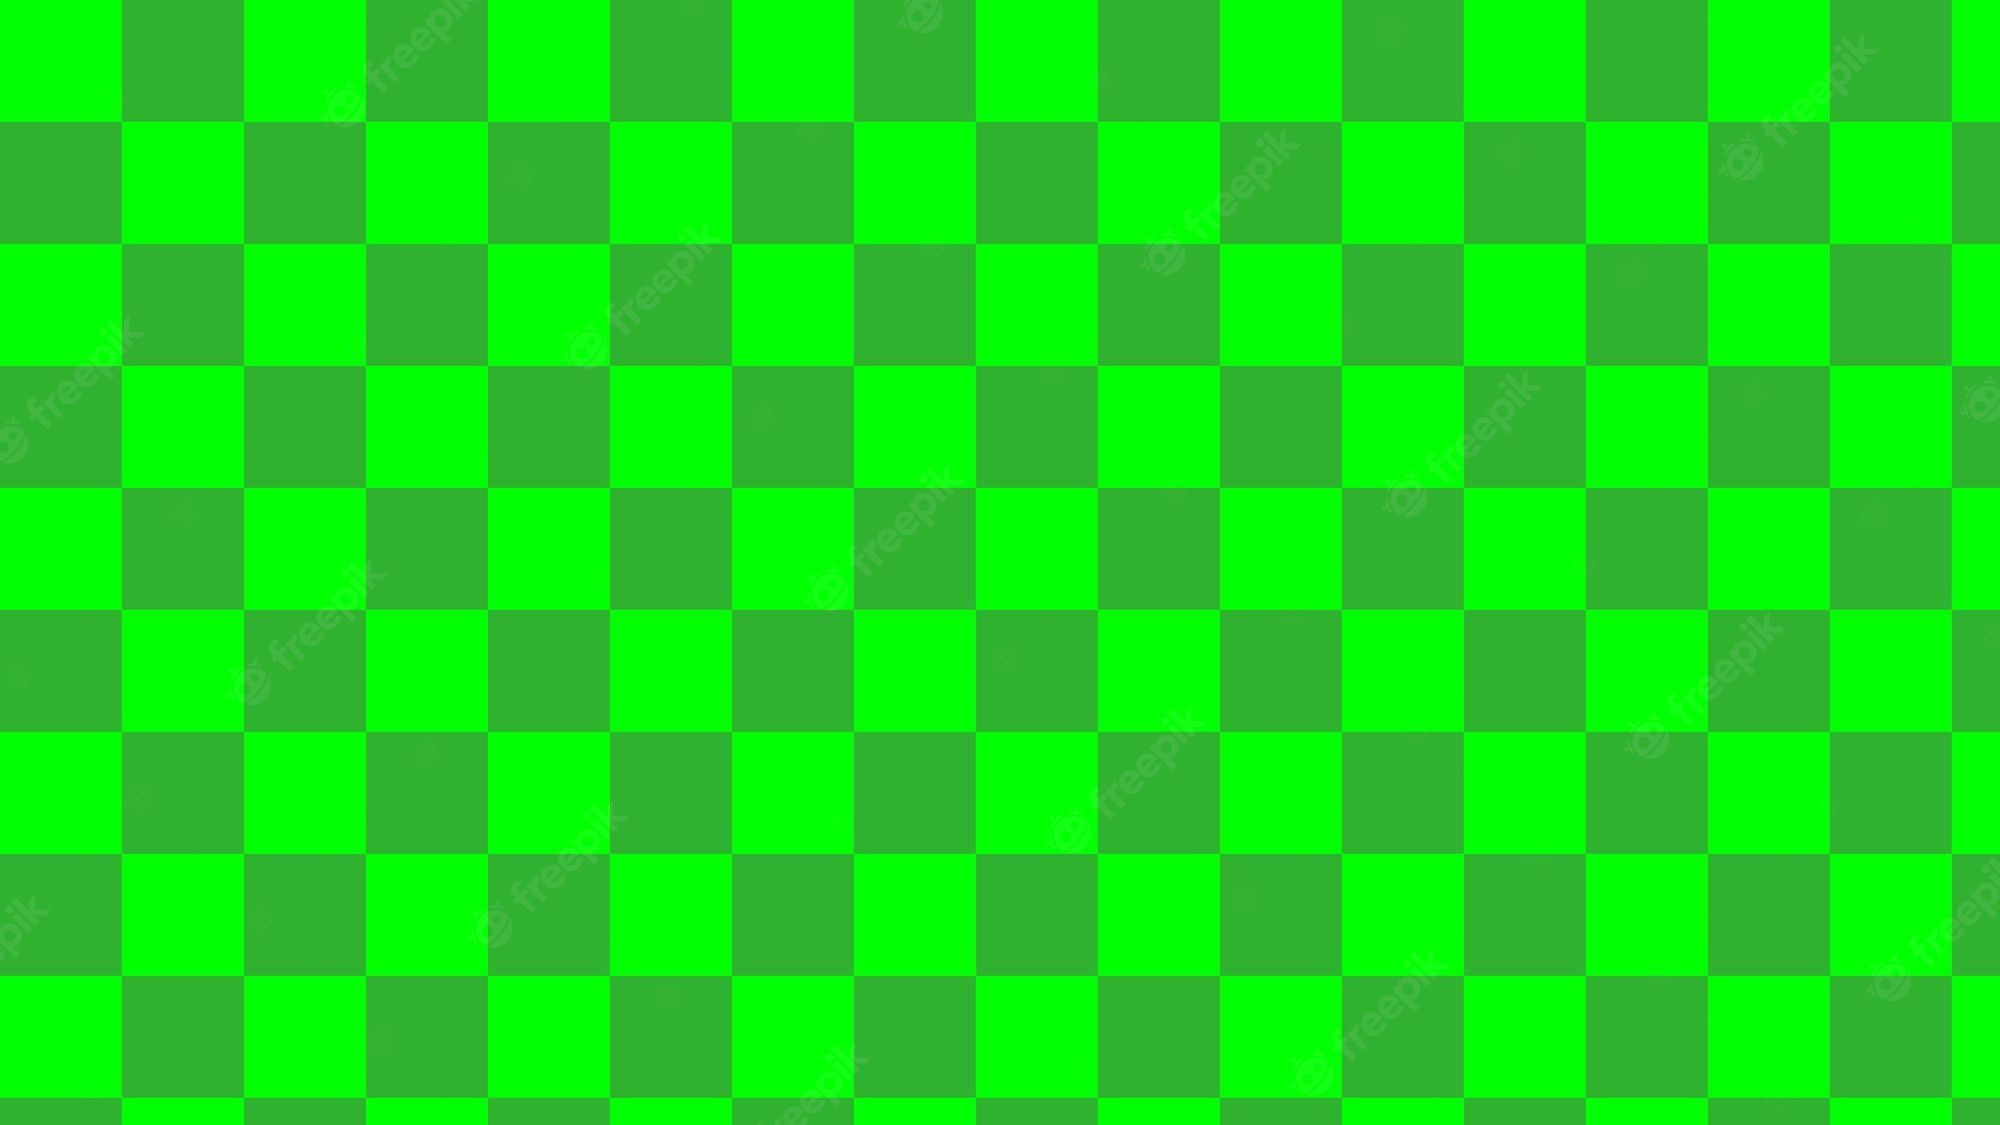 Green chessboard with a green background - Neon green, grid, lime green